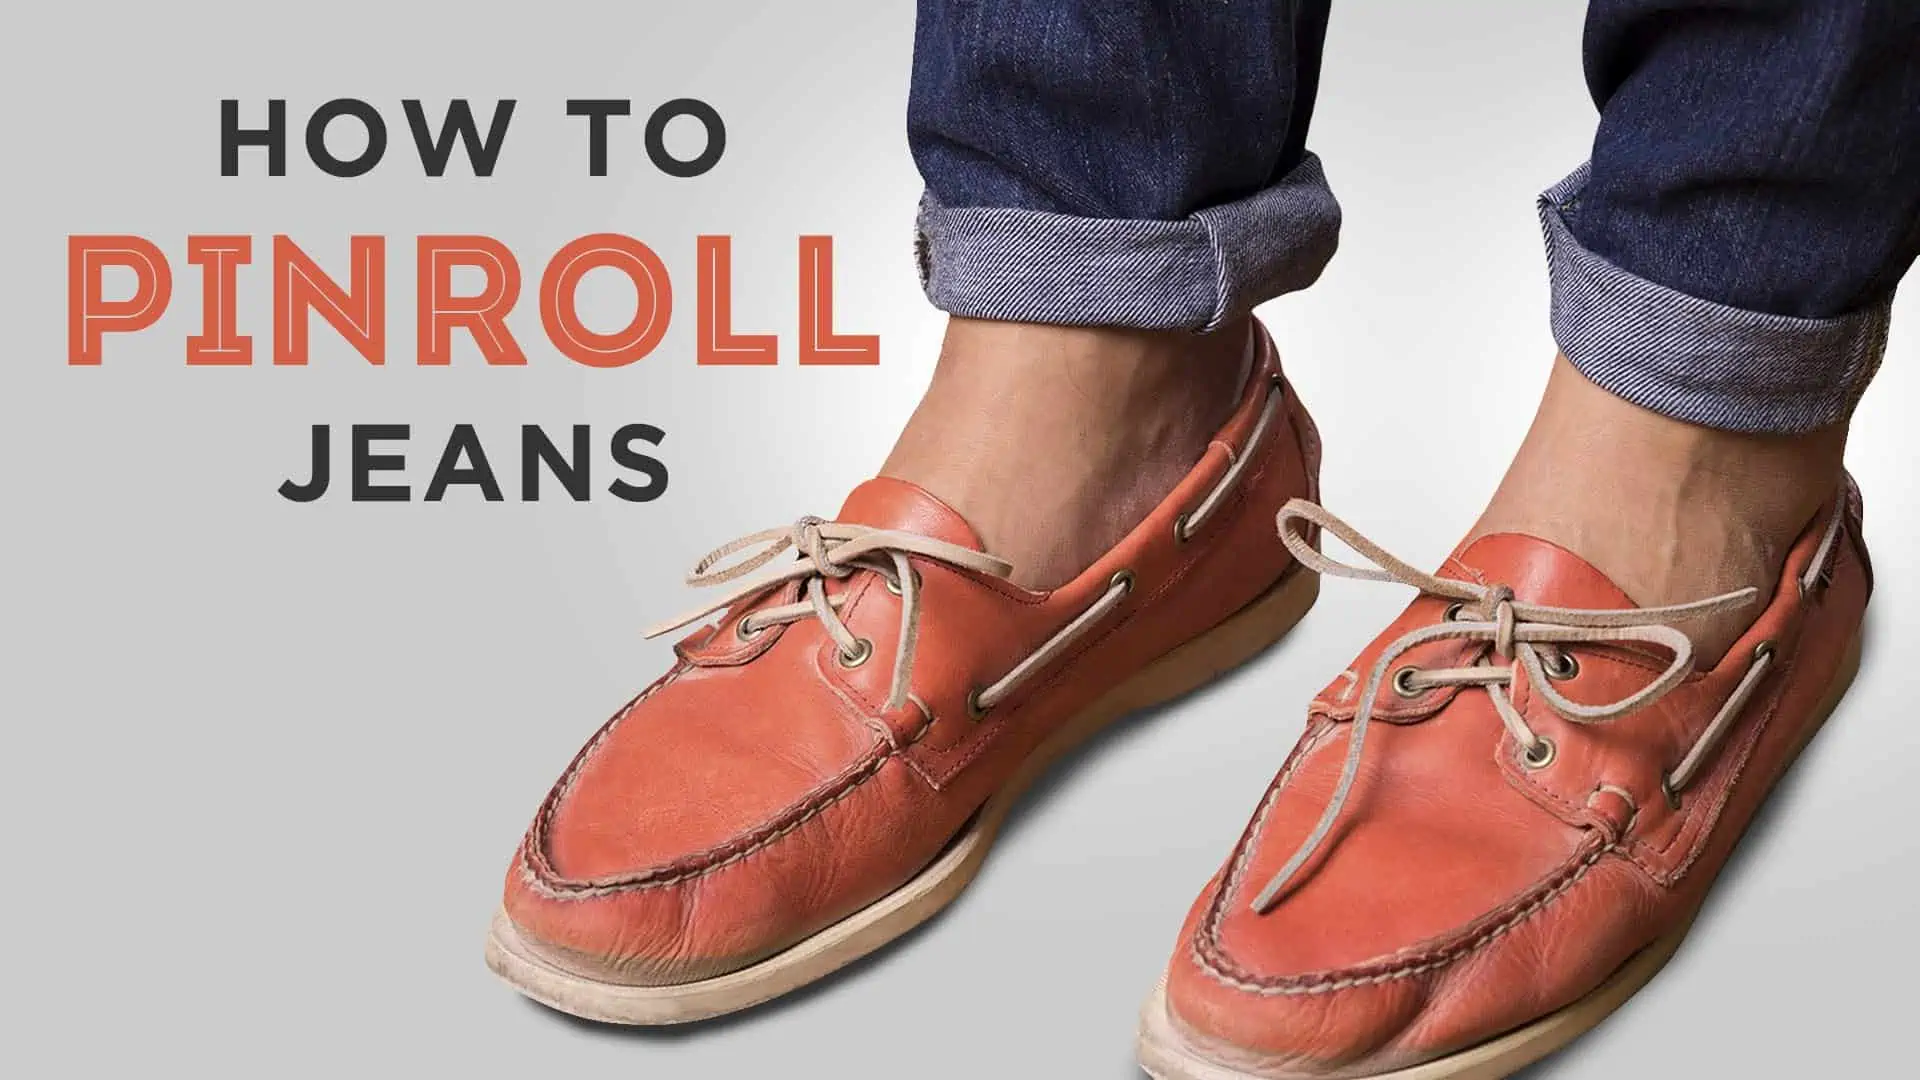 How To Pinroll Jeans